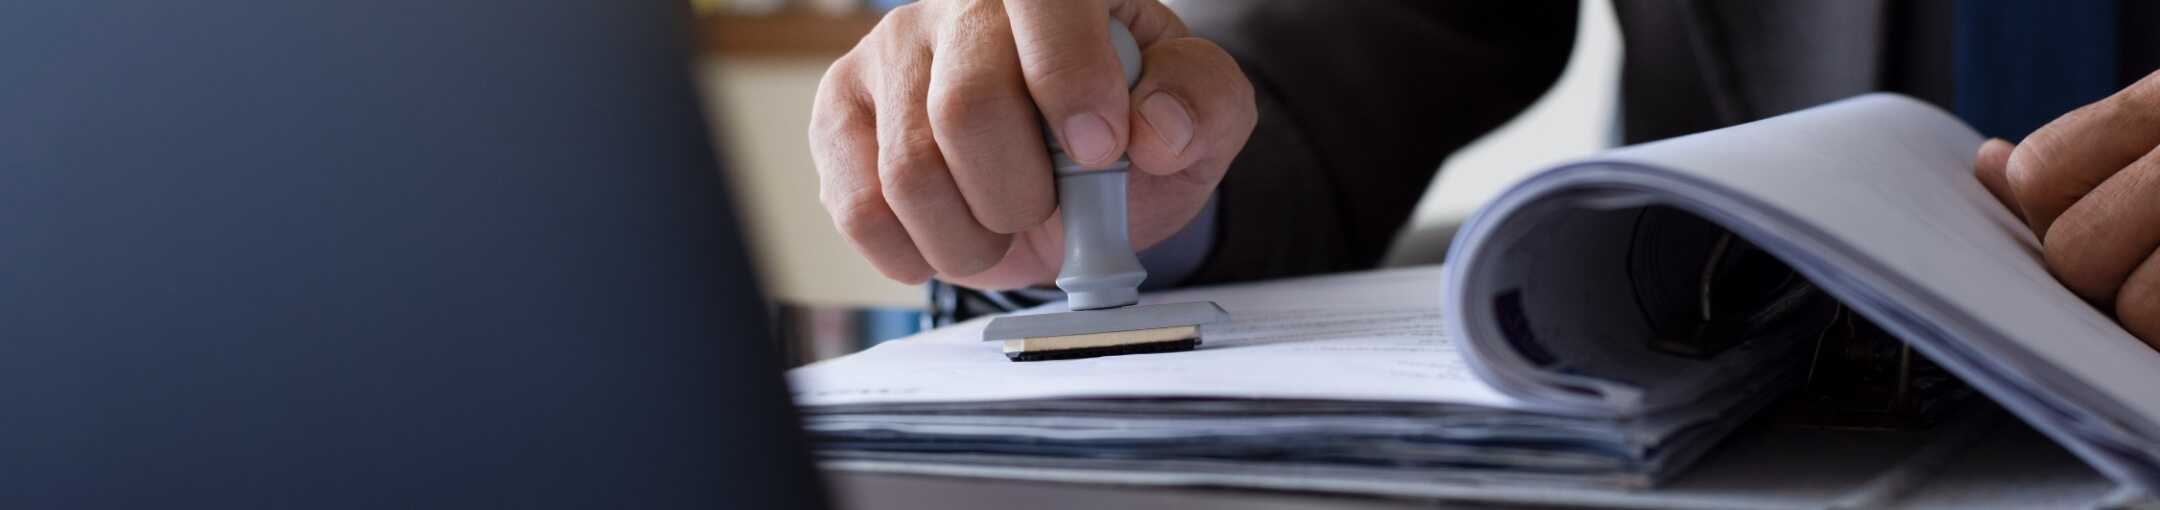 A close up of a person stamping a document.